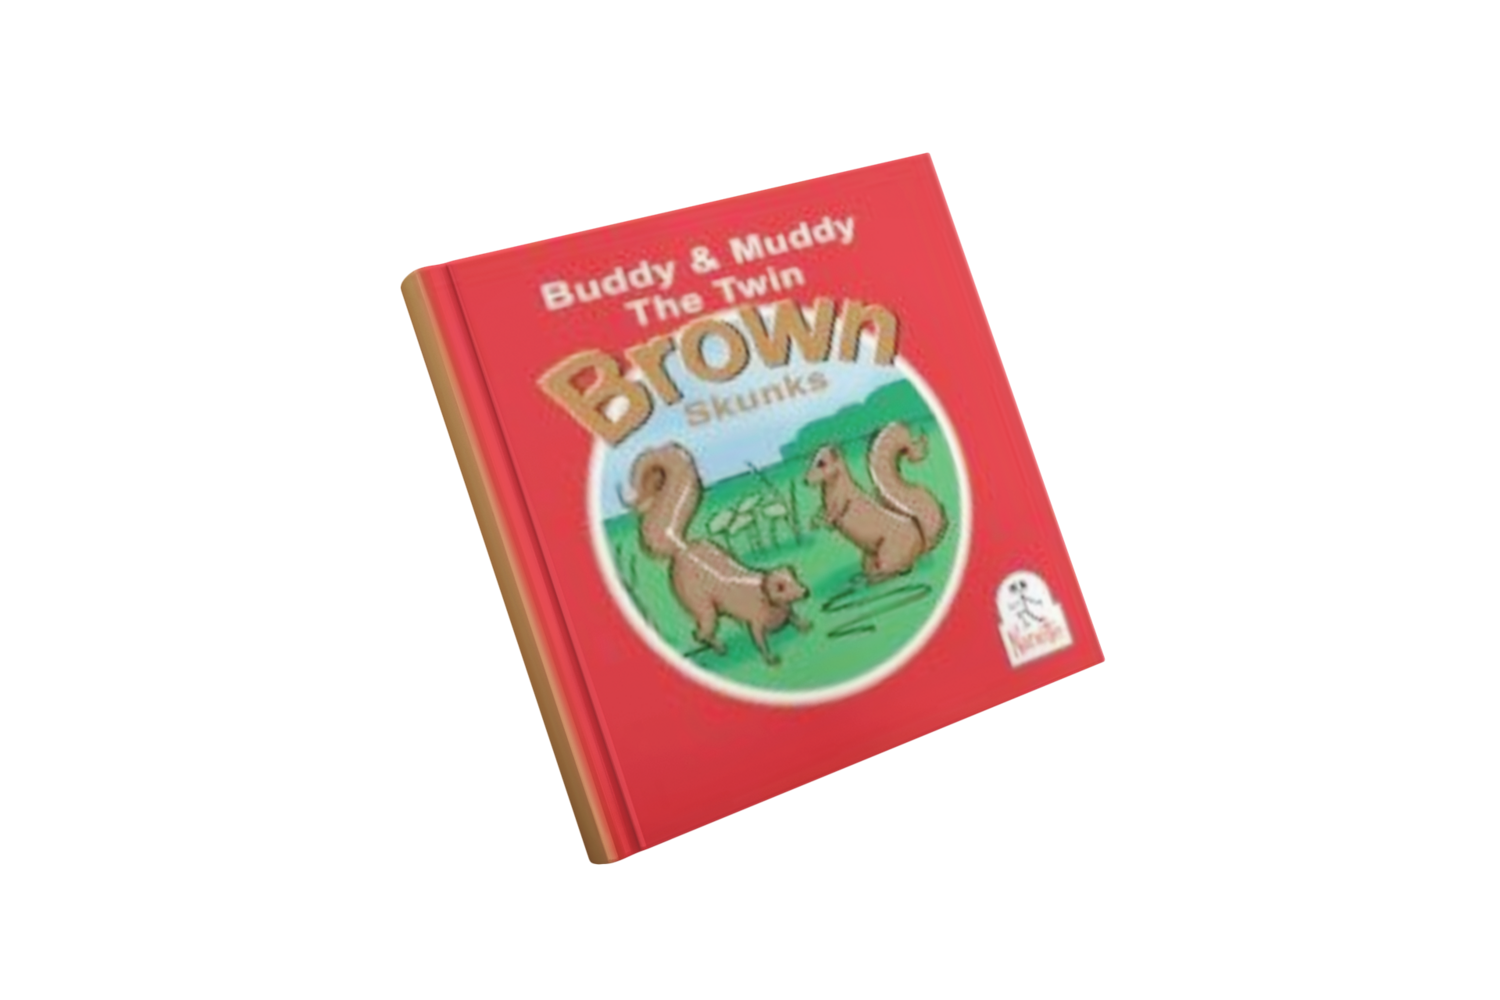 Buddy and Muddy the Twin Brown Skunks Book